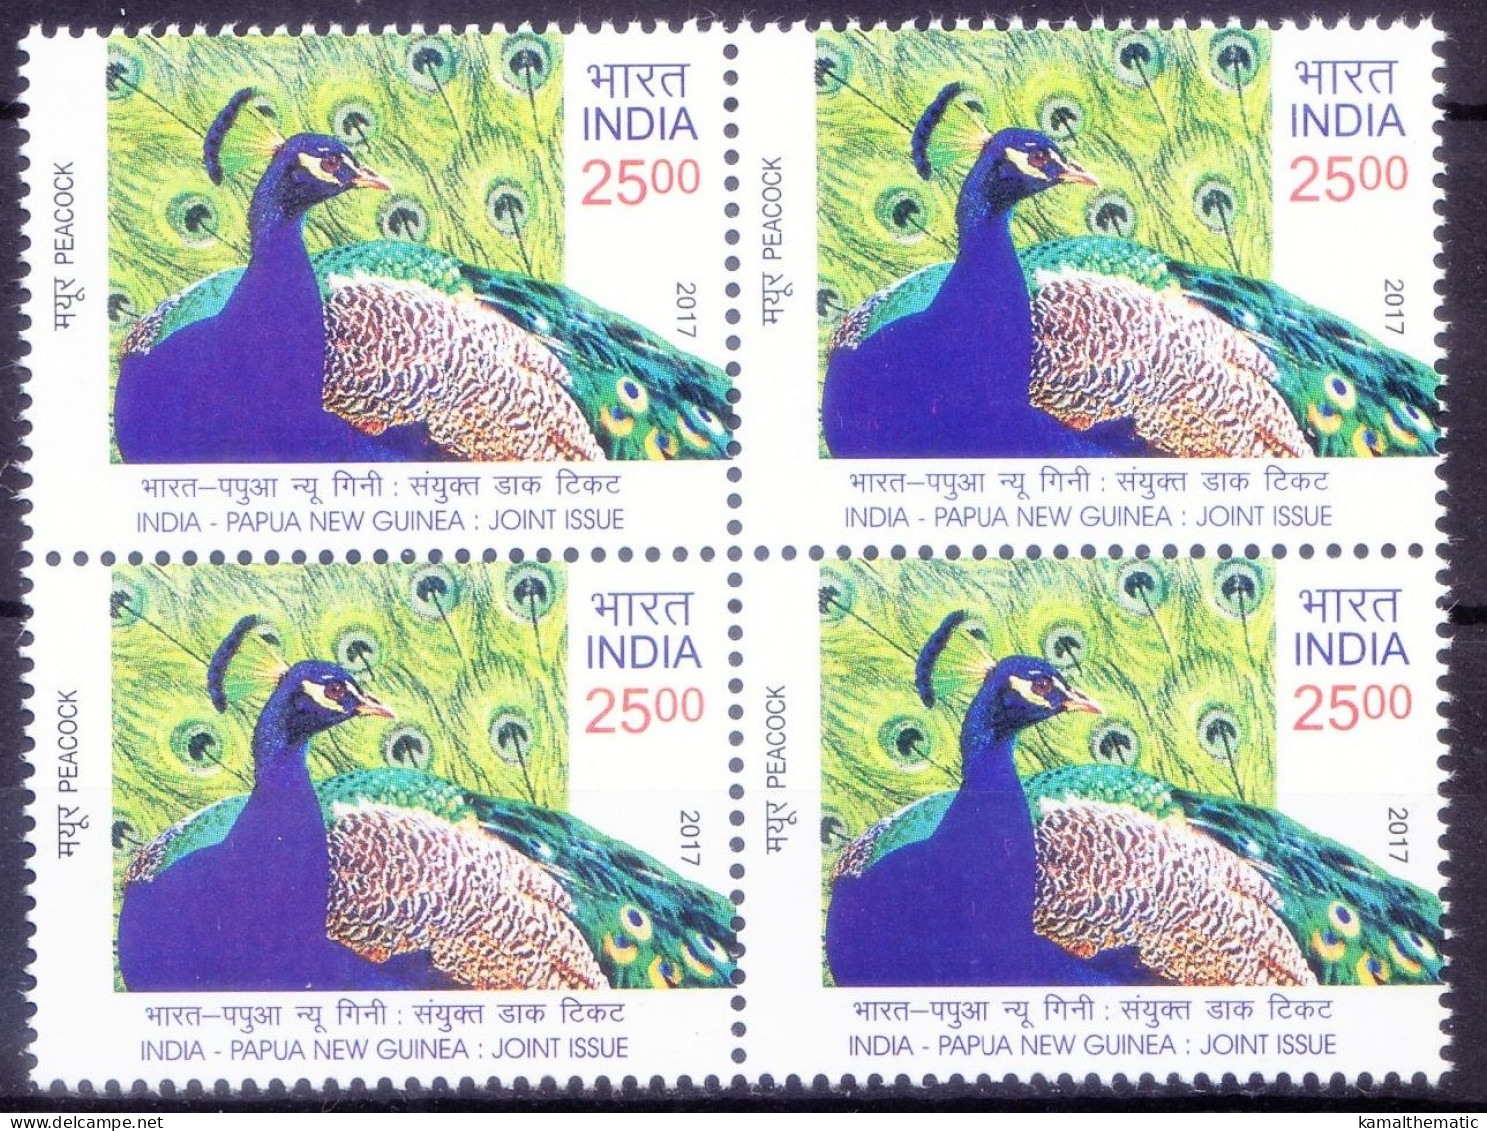 India 2017 MNH Blk, Papua New Guinea Jt Issue, Peacock, Birds - Pavoni